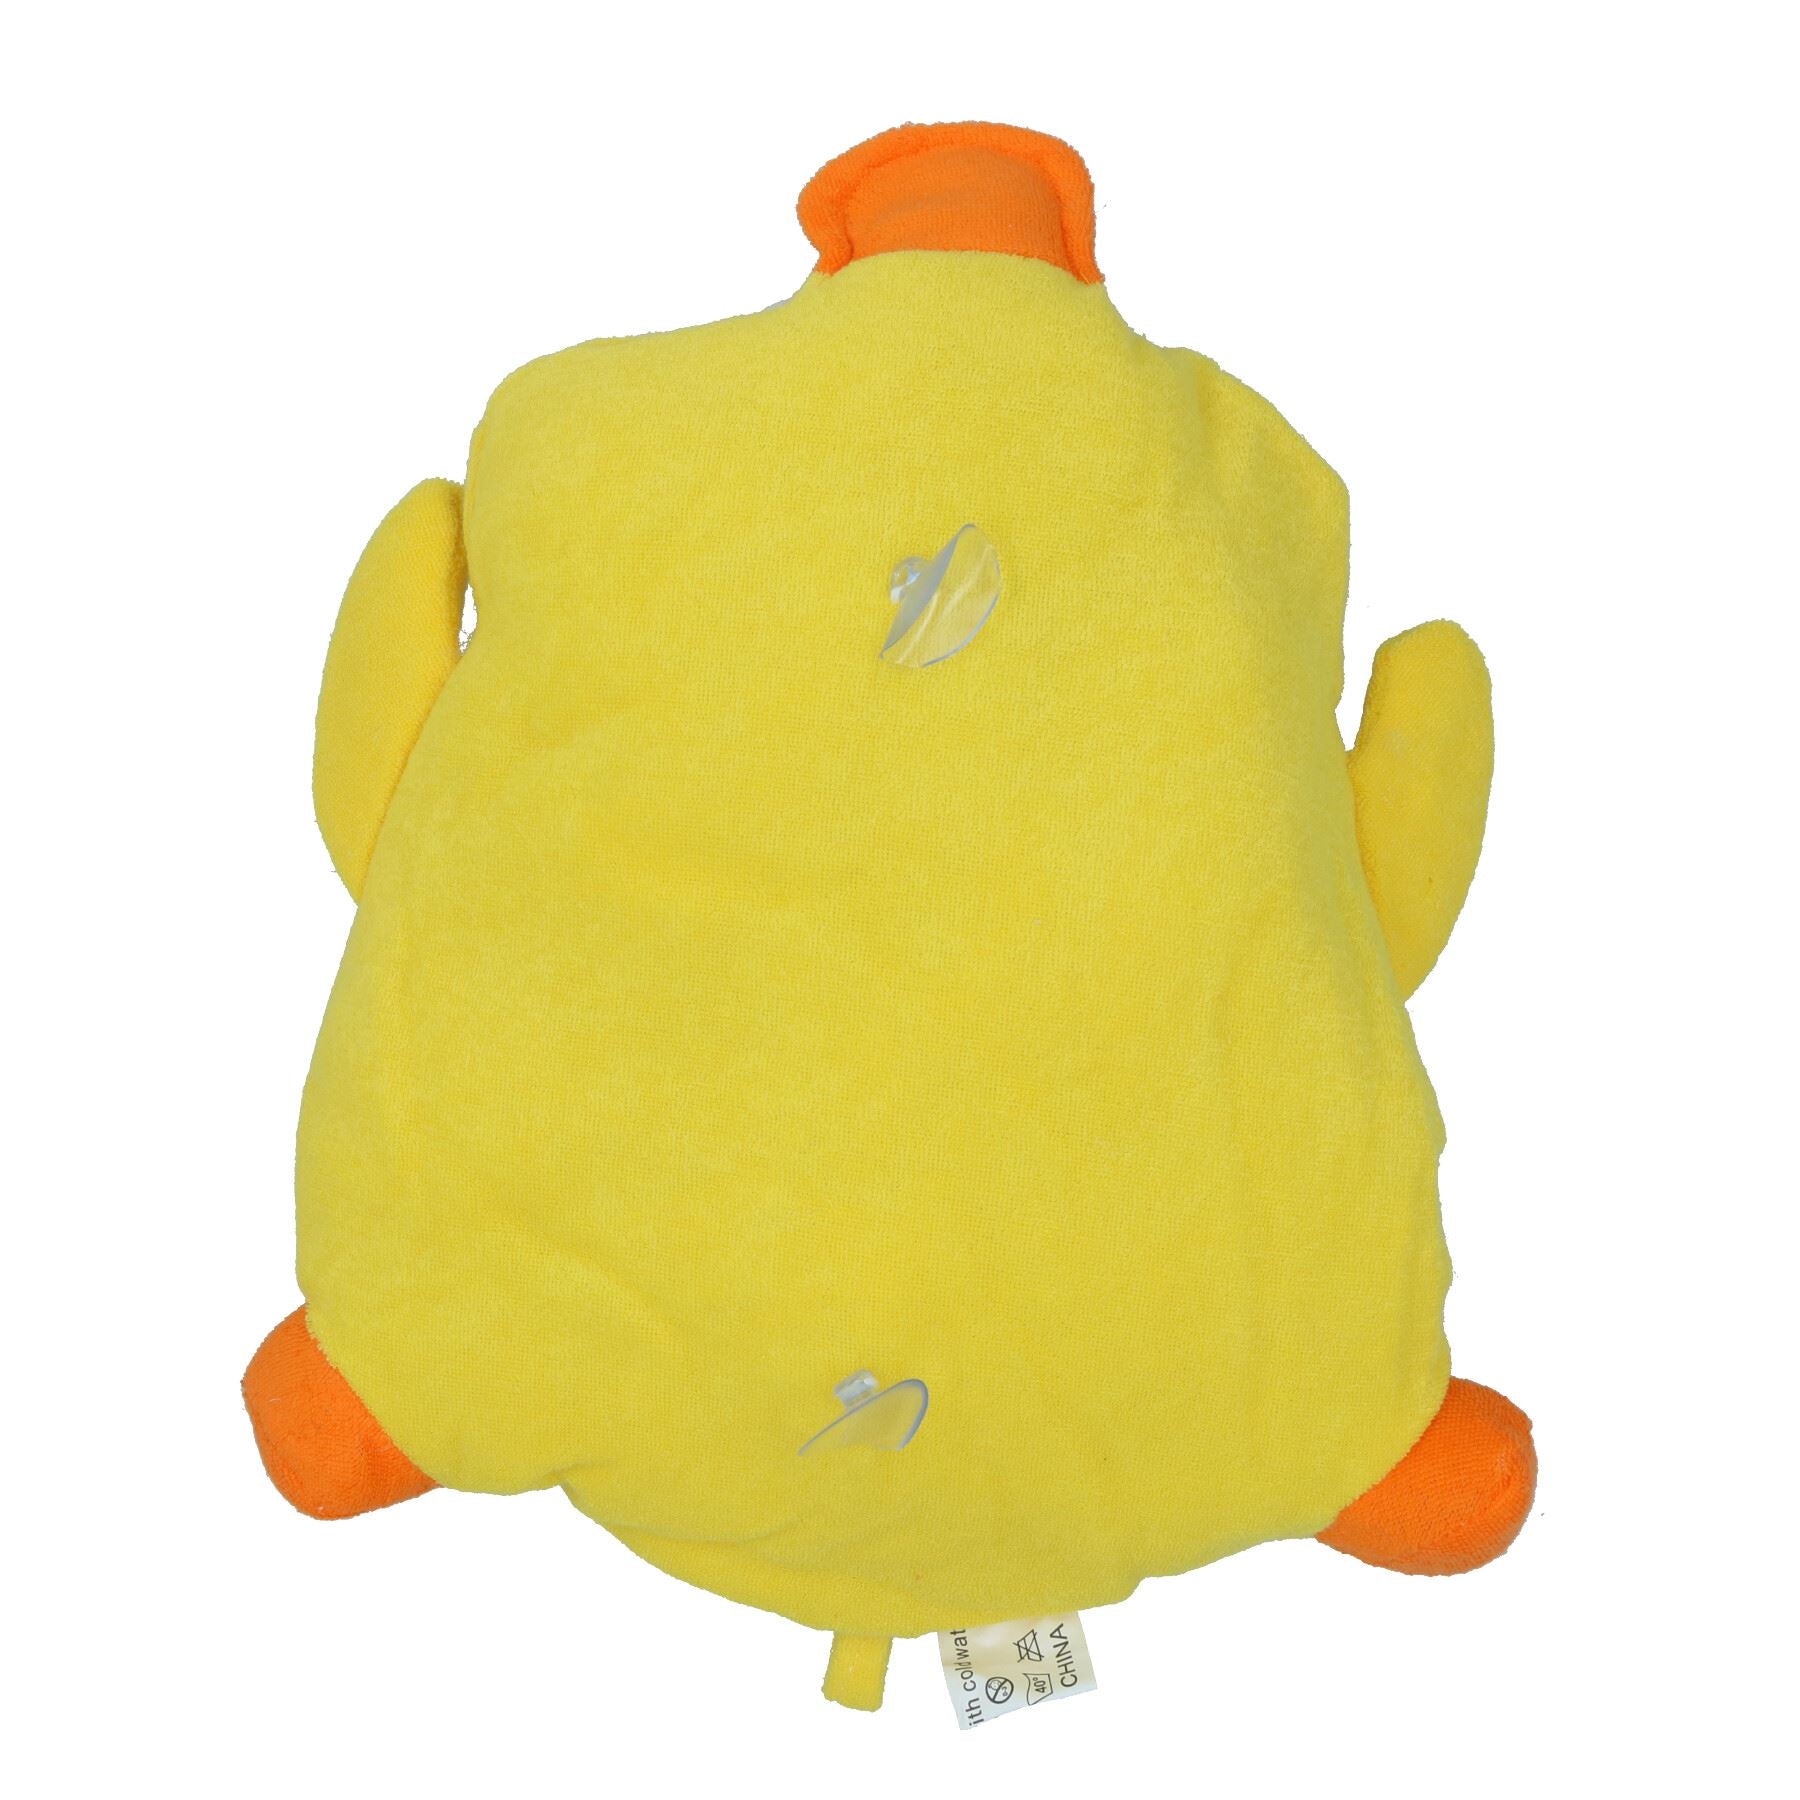 Yellow Duck Design Bath Pillow Cushion With Suction Pads Head / Neck Rest